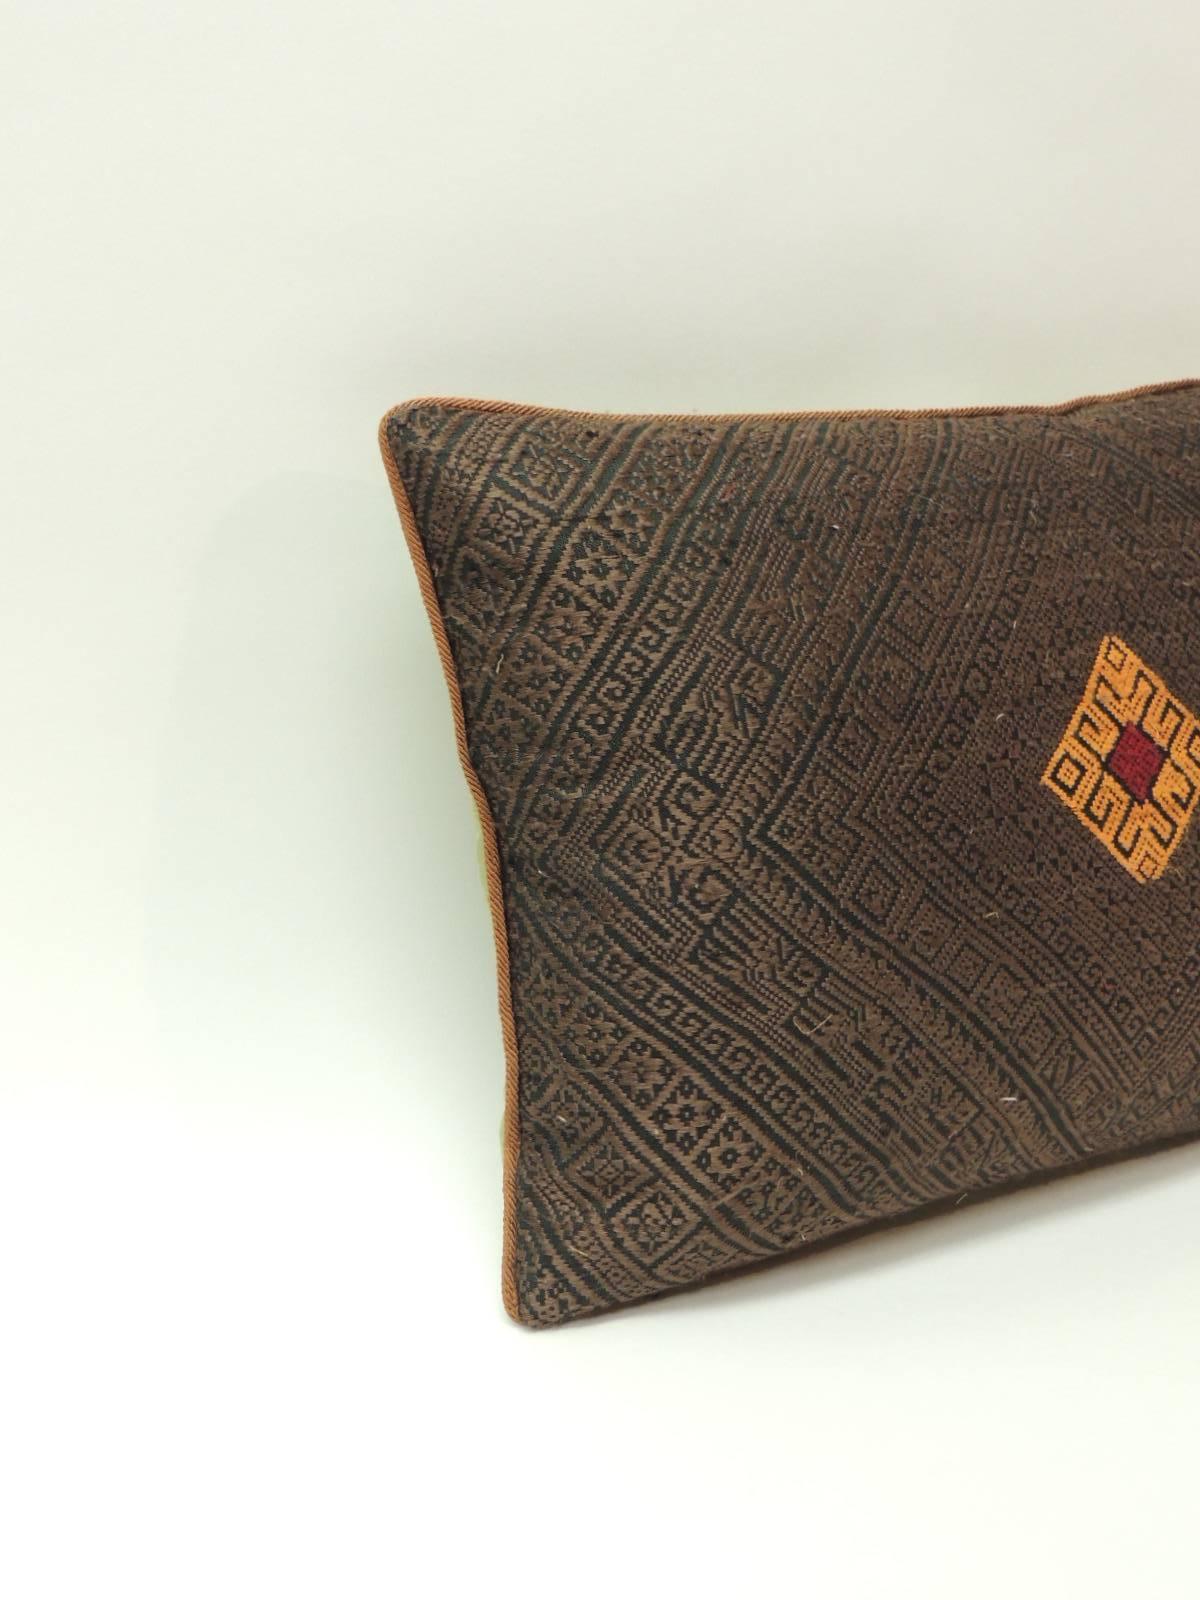 Vintage brown and orange tribal woven silk petite decorative pillow
Vintage brown and orange tribal woven silk petite decorative pillow. Throw pillow handcrafted with a small silk woven tribal brown textile with an orange and red pattern center.